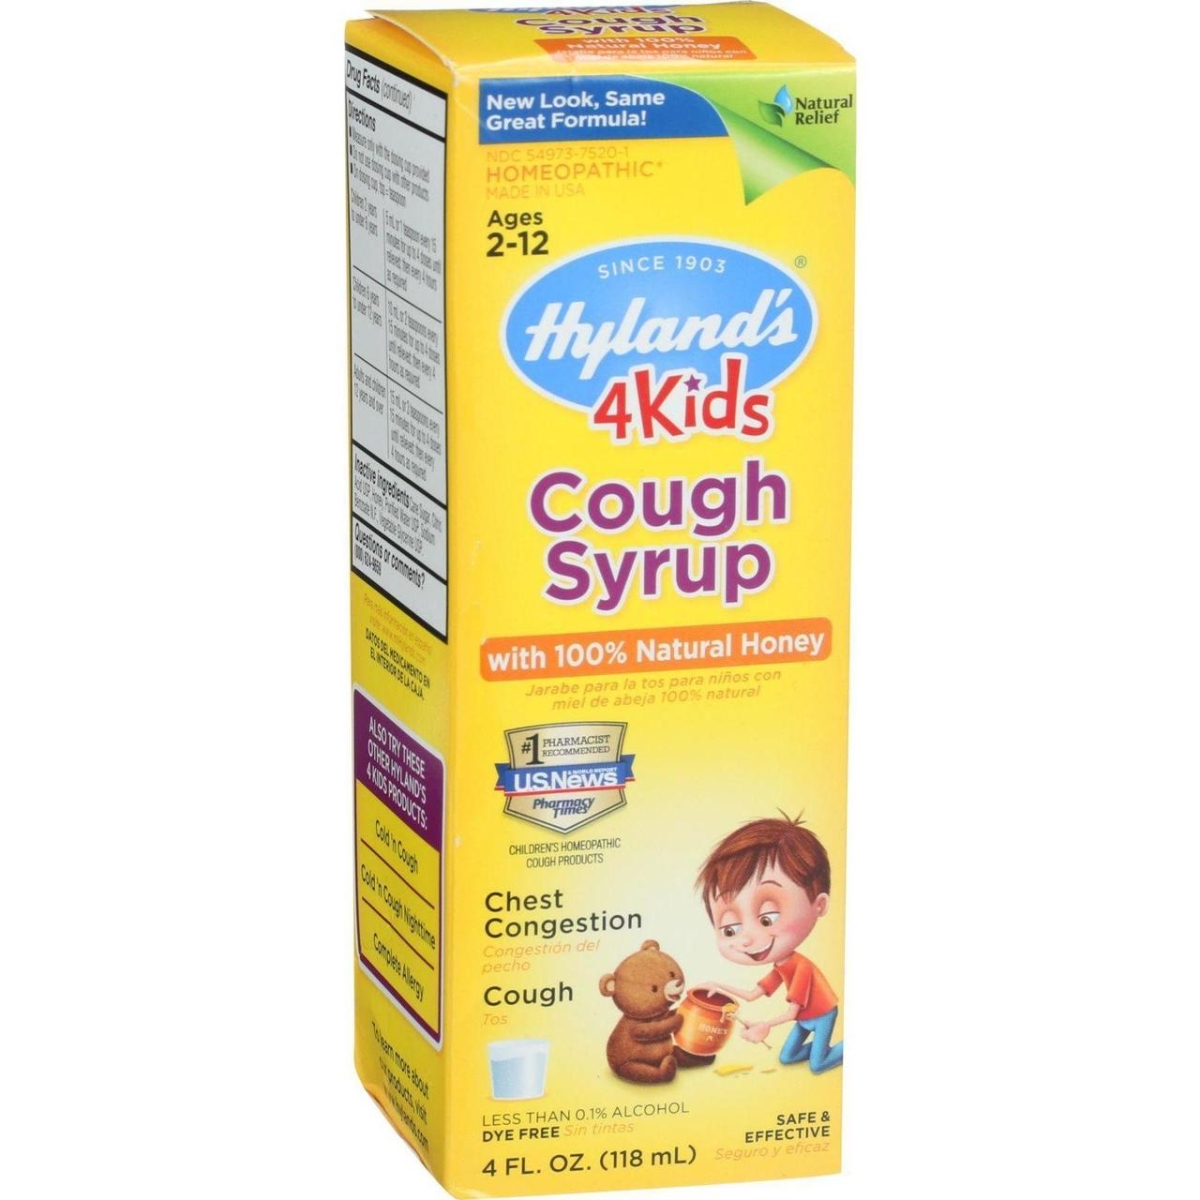 Hg1150481 4 Oz Homeopathic Cough Syrup With 100 Percent Natural Honey - 4 Kids